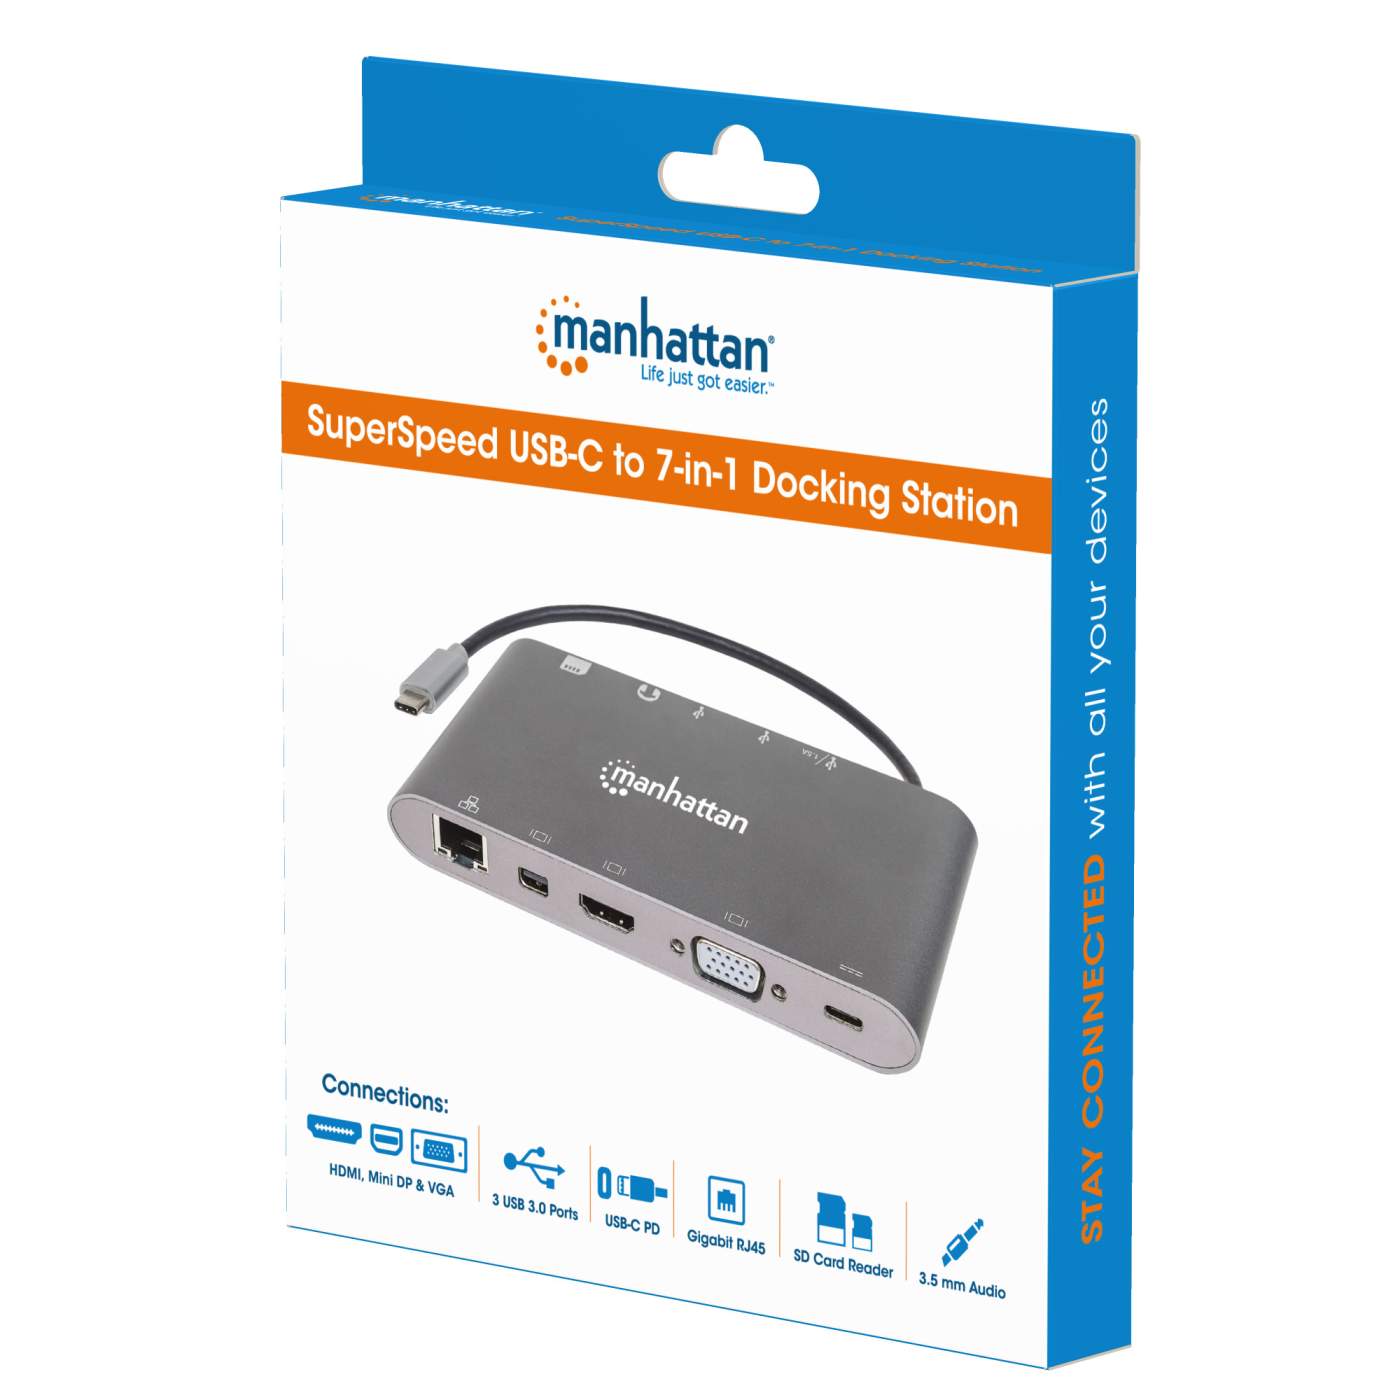 SuperSpeed USB-C to 7-in-1 Docking Station Packaging Image 2